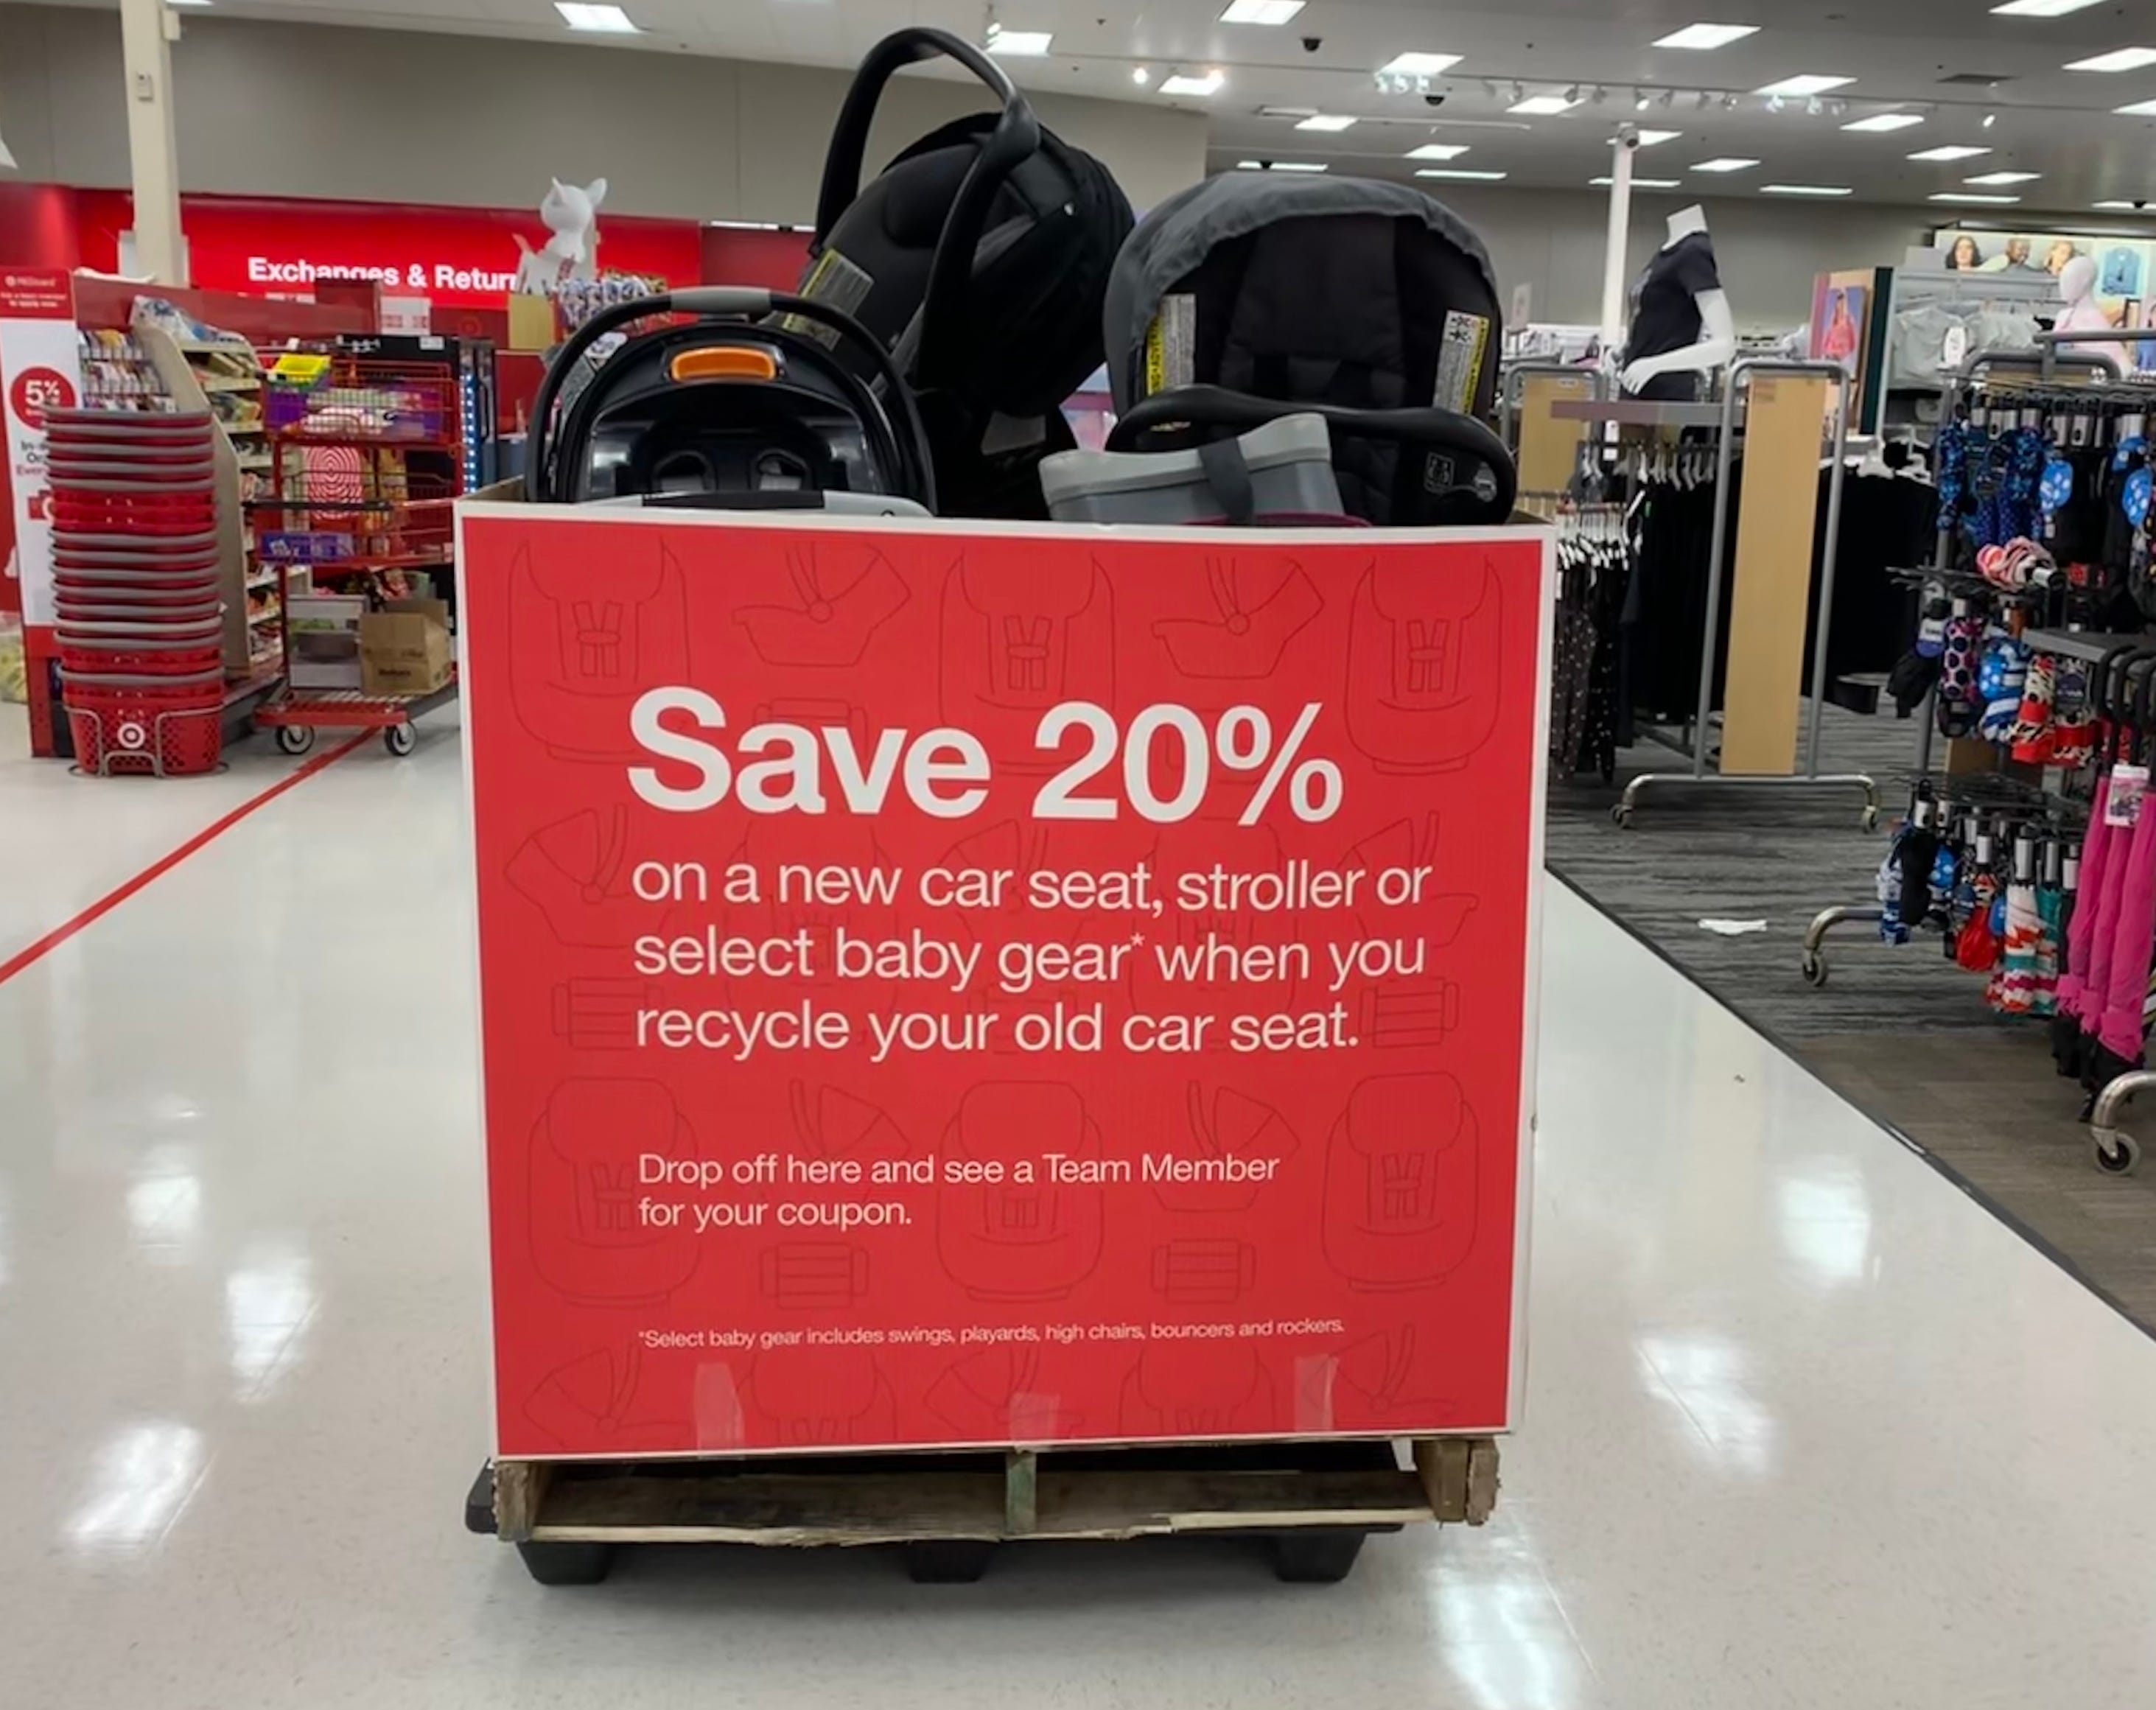 car seat for 2 year old target